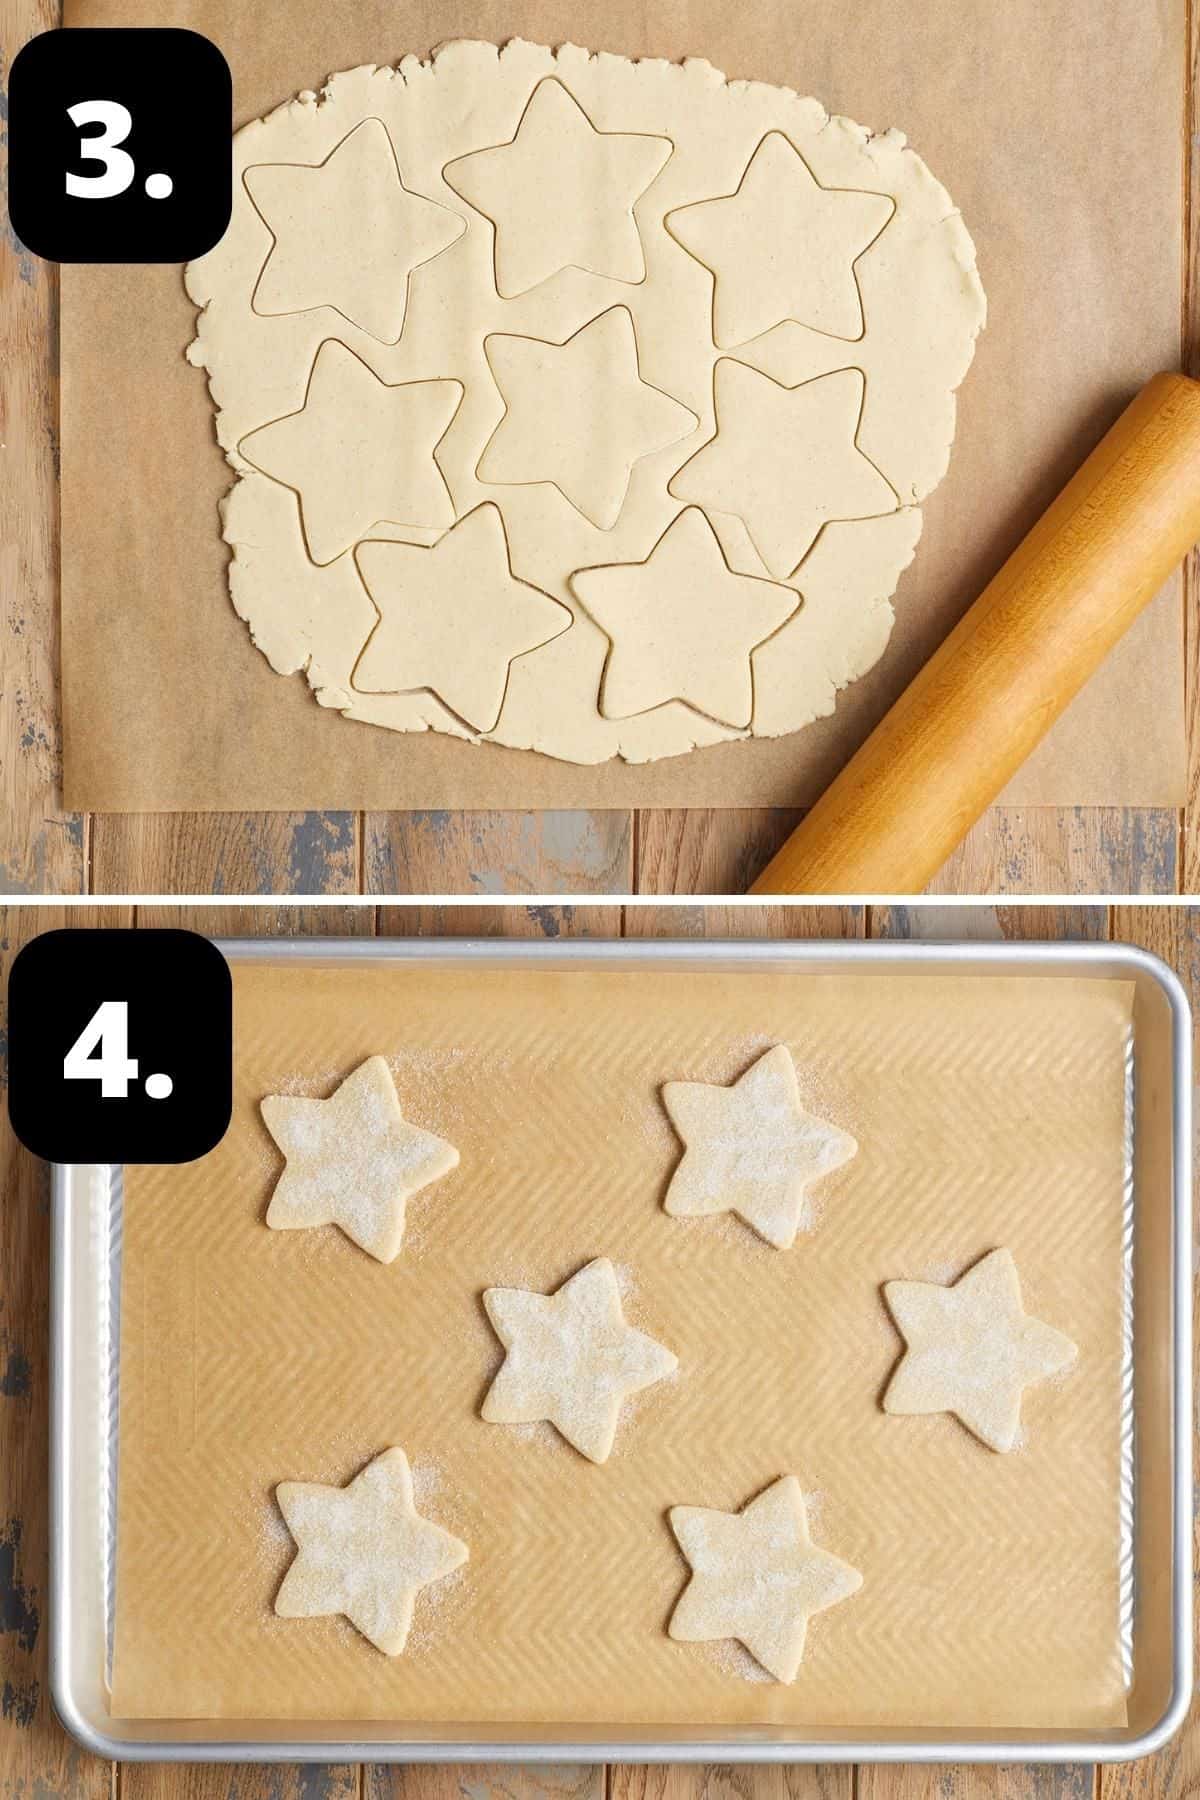 Steps 3-4 of preparing this recipe - the dough rolled out and being cut and the cut cookies on baking tray ready for the oven.